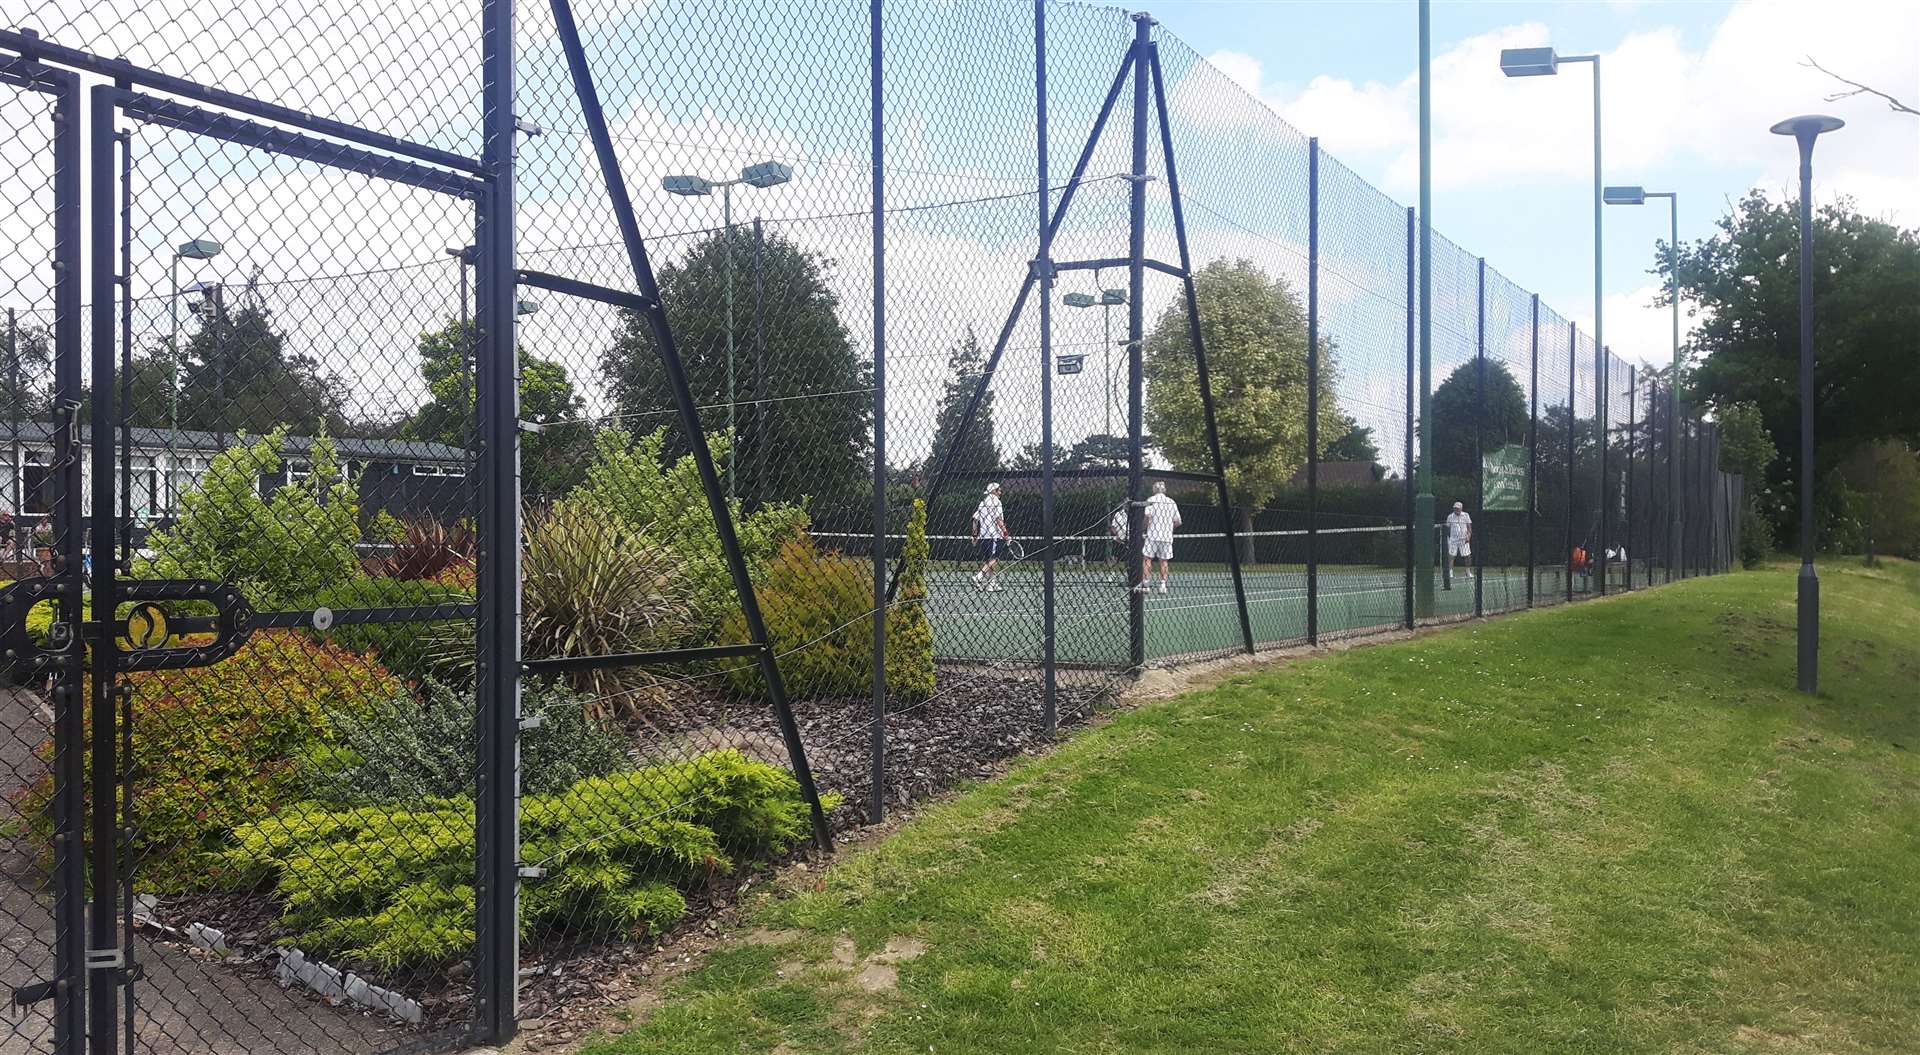 The tennis club hopes to expand to offer extra courts